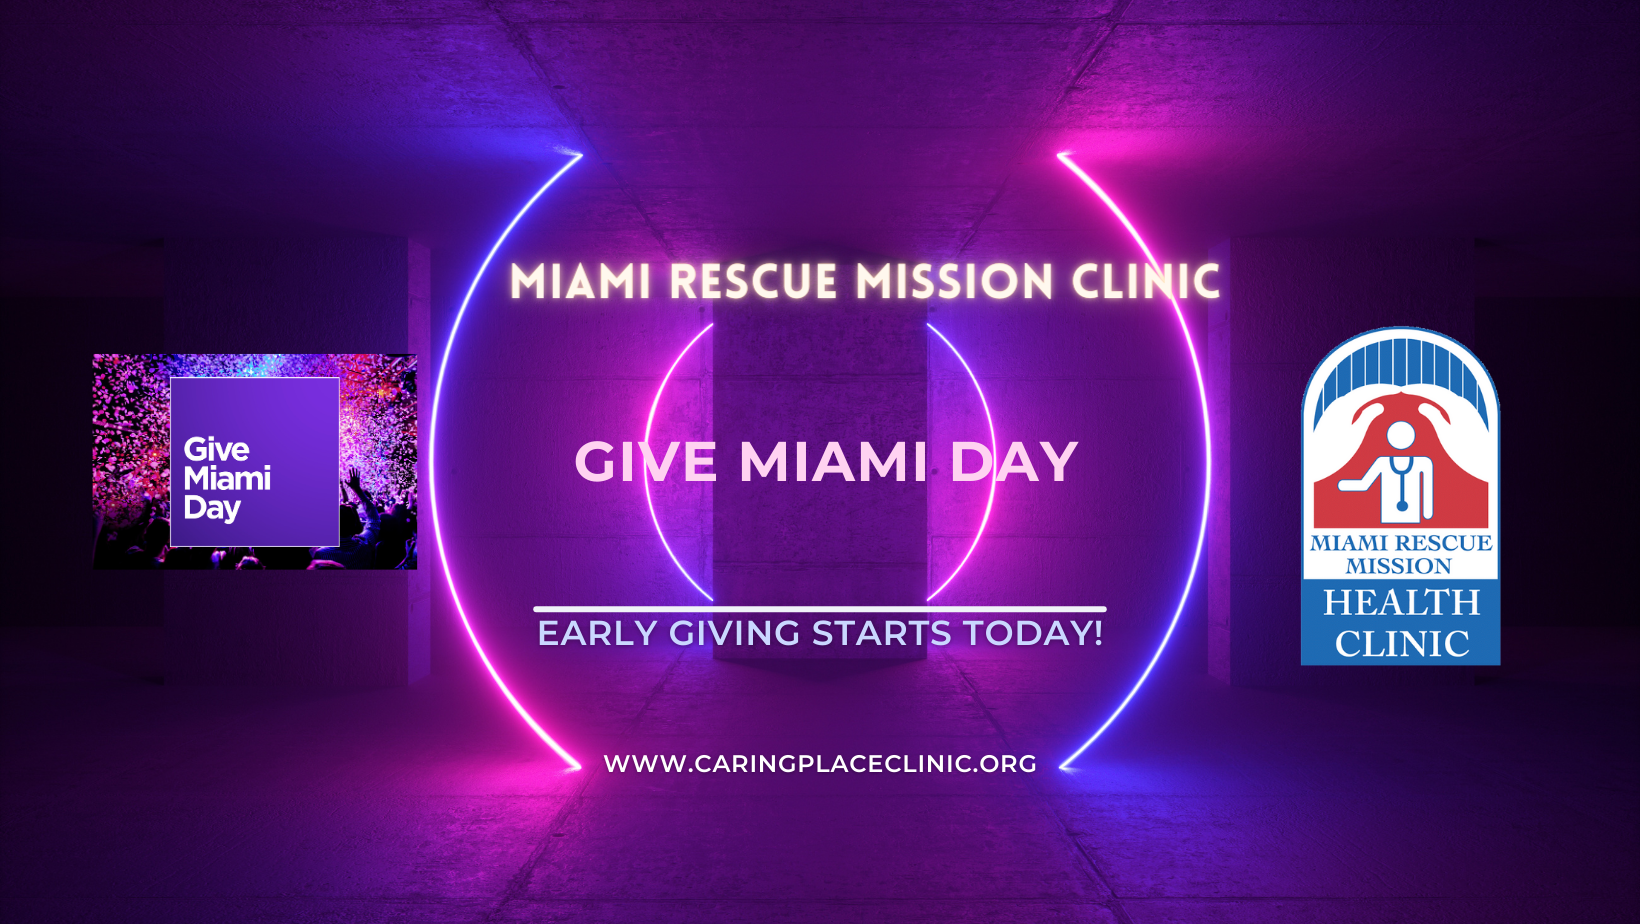 Miami Rescue Mission Clinic, Inc. Jumpstart your generosity, Miami Rescue Mission Clinic's Give Miami Day early giving is now open!